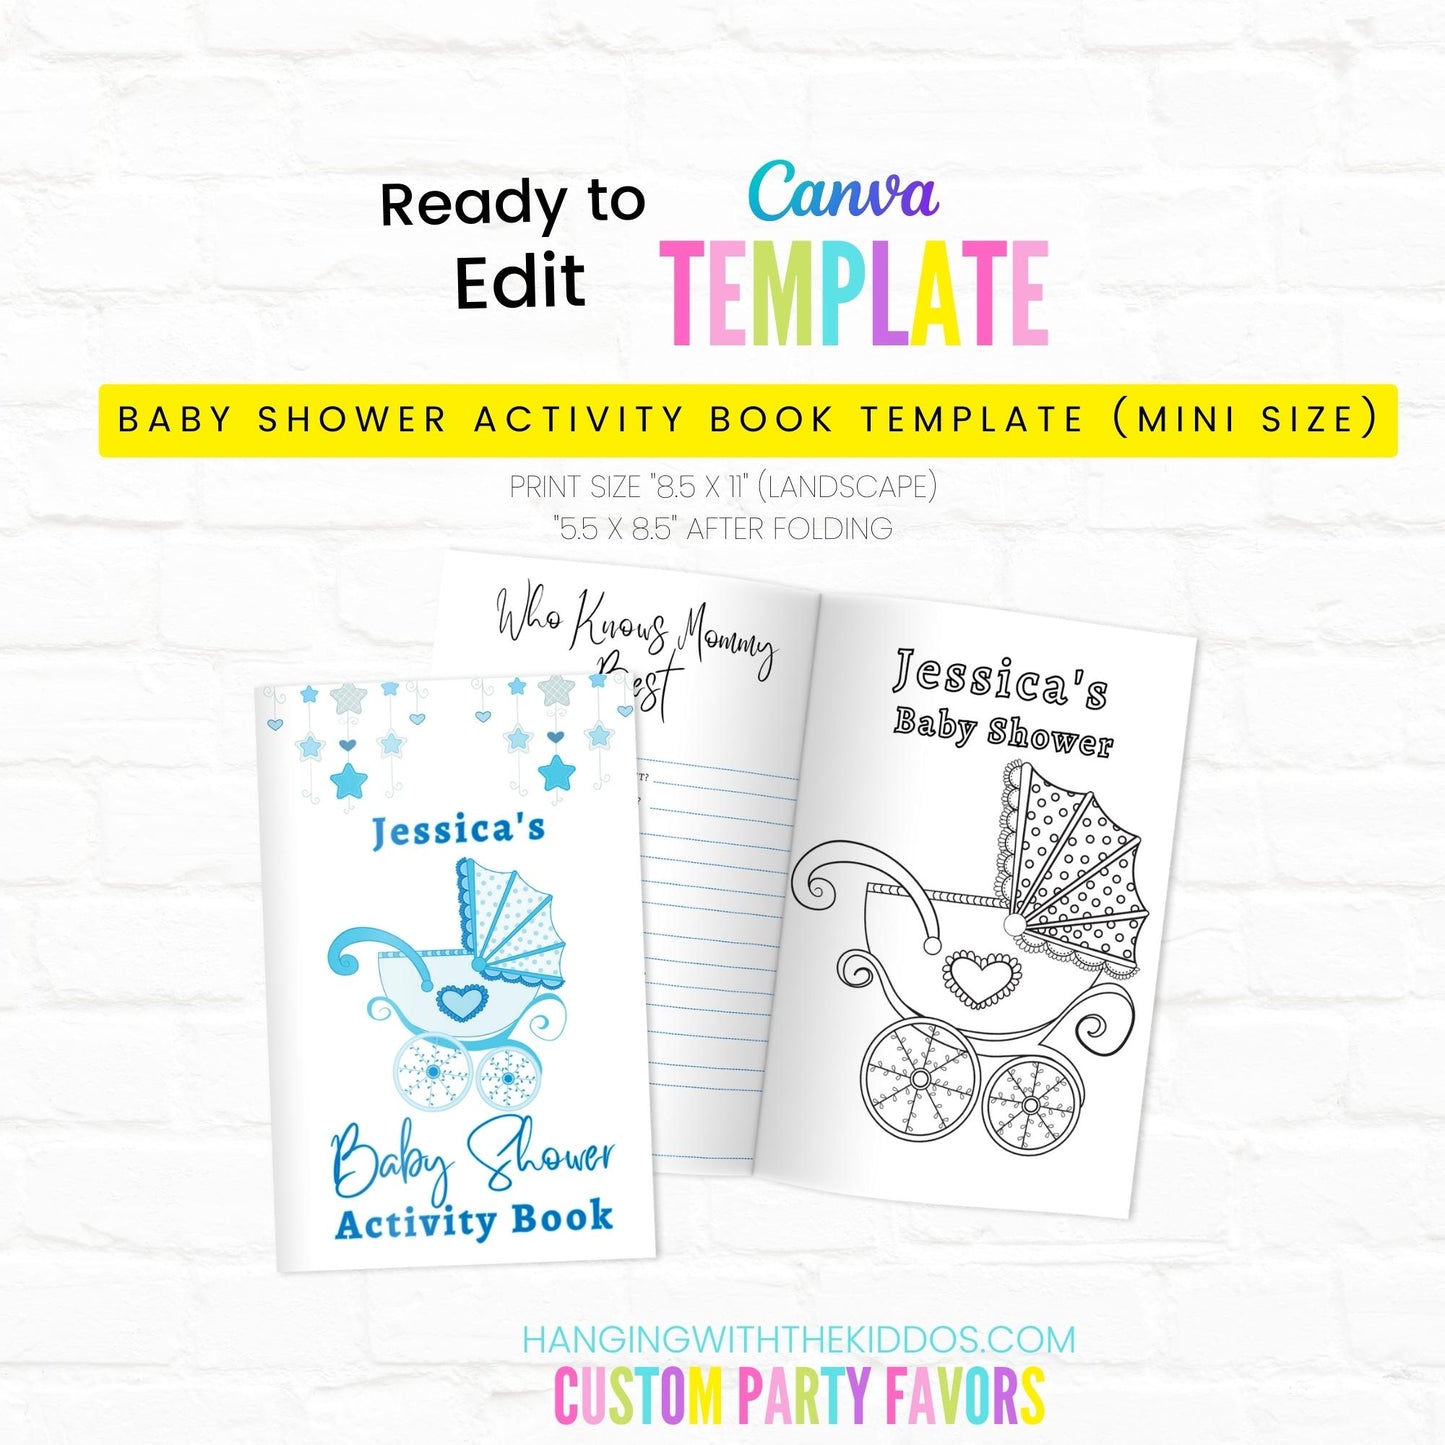 Baby Shower Activity Book Template